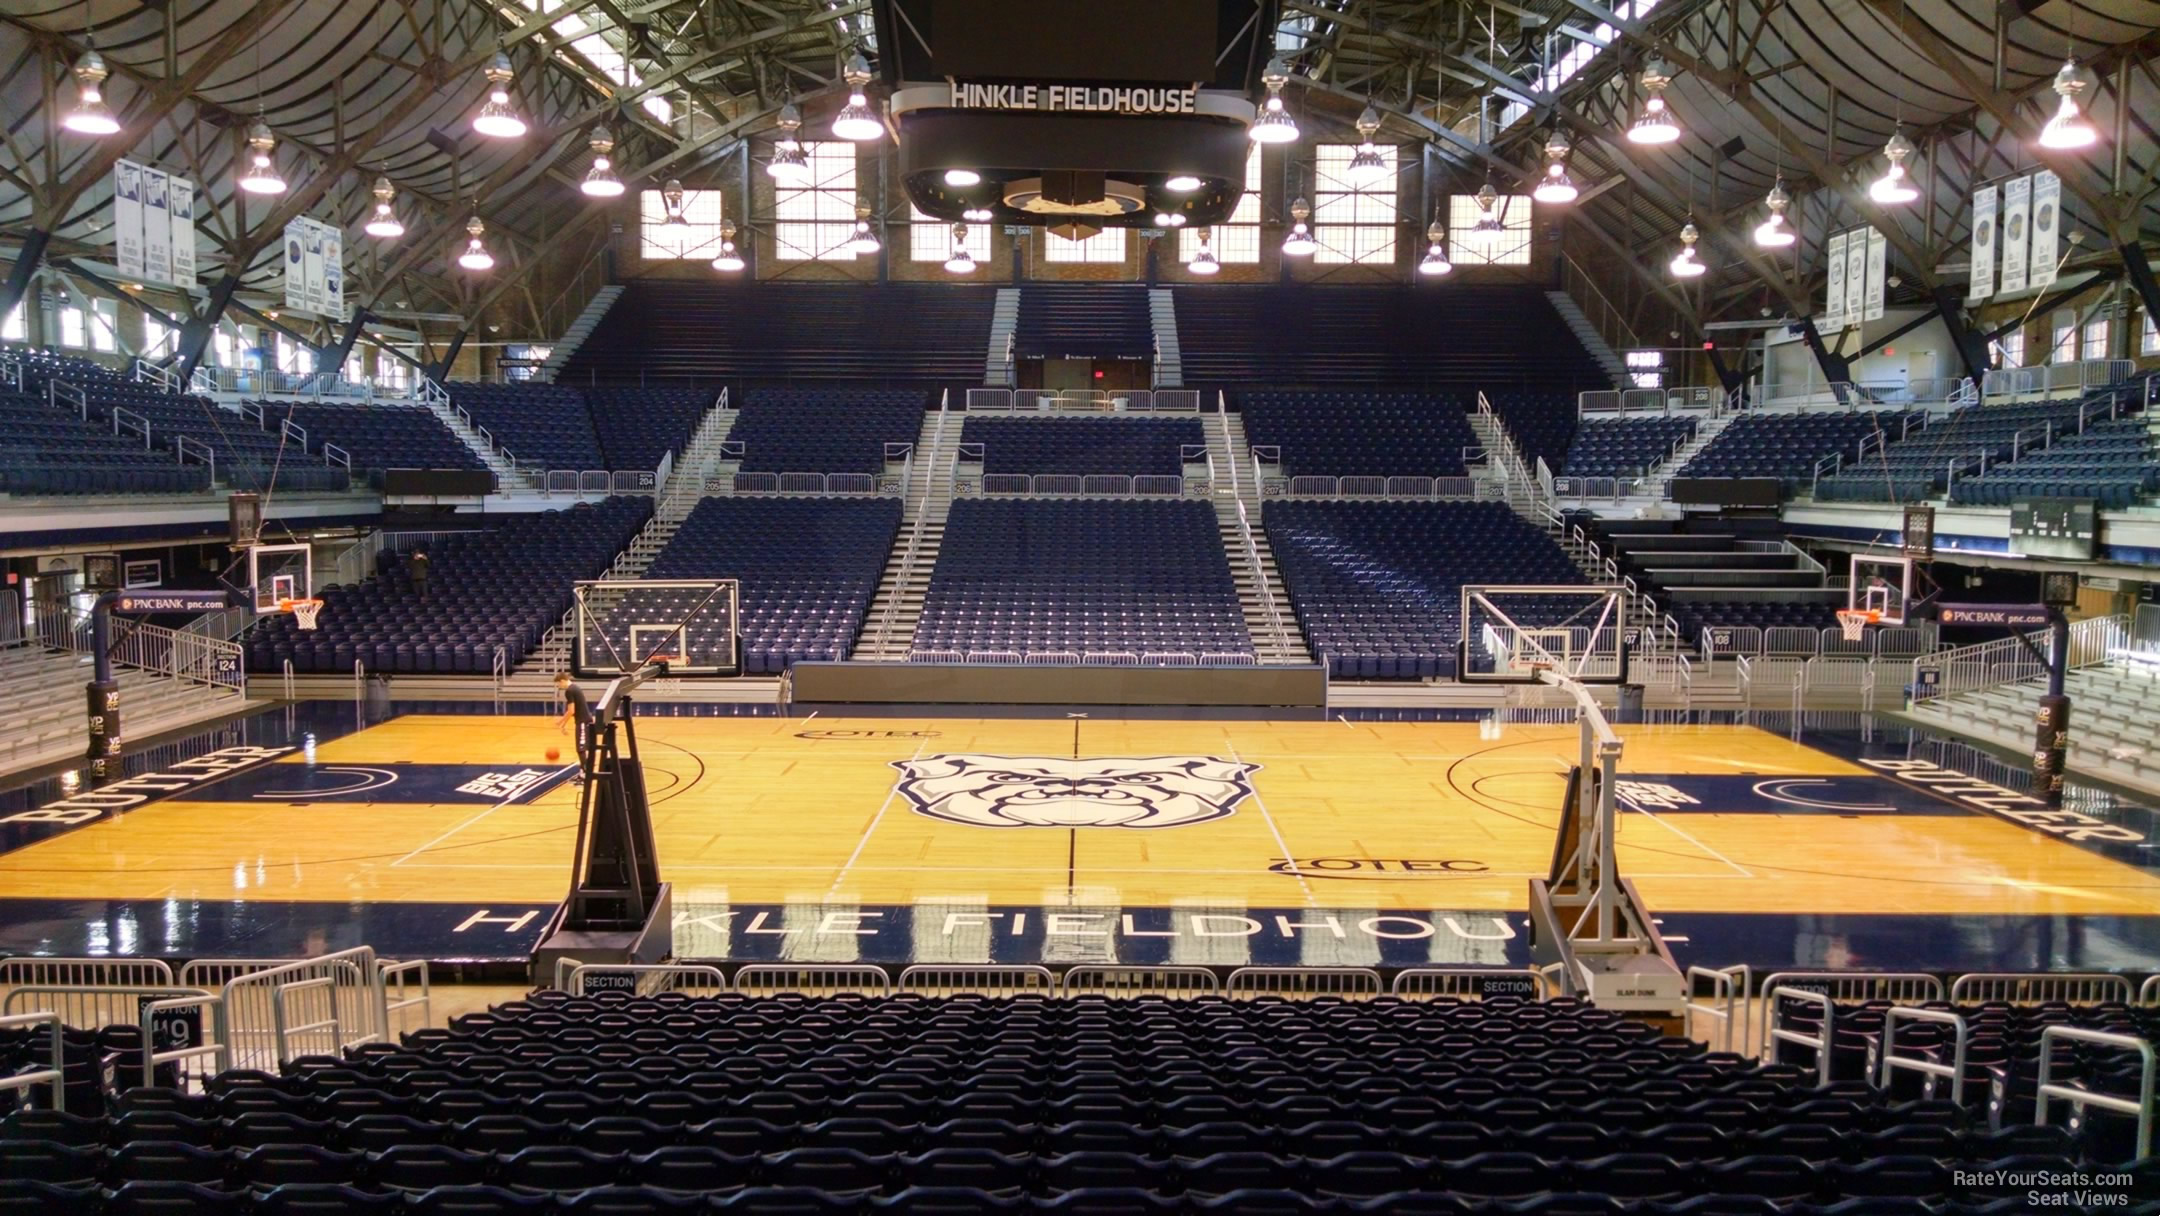 Hinkle Fieldhouse Section 118 - RateYourSeats.com